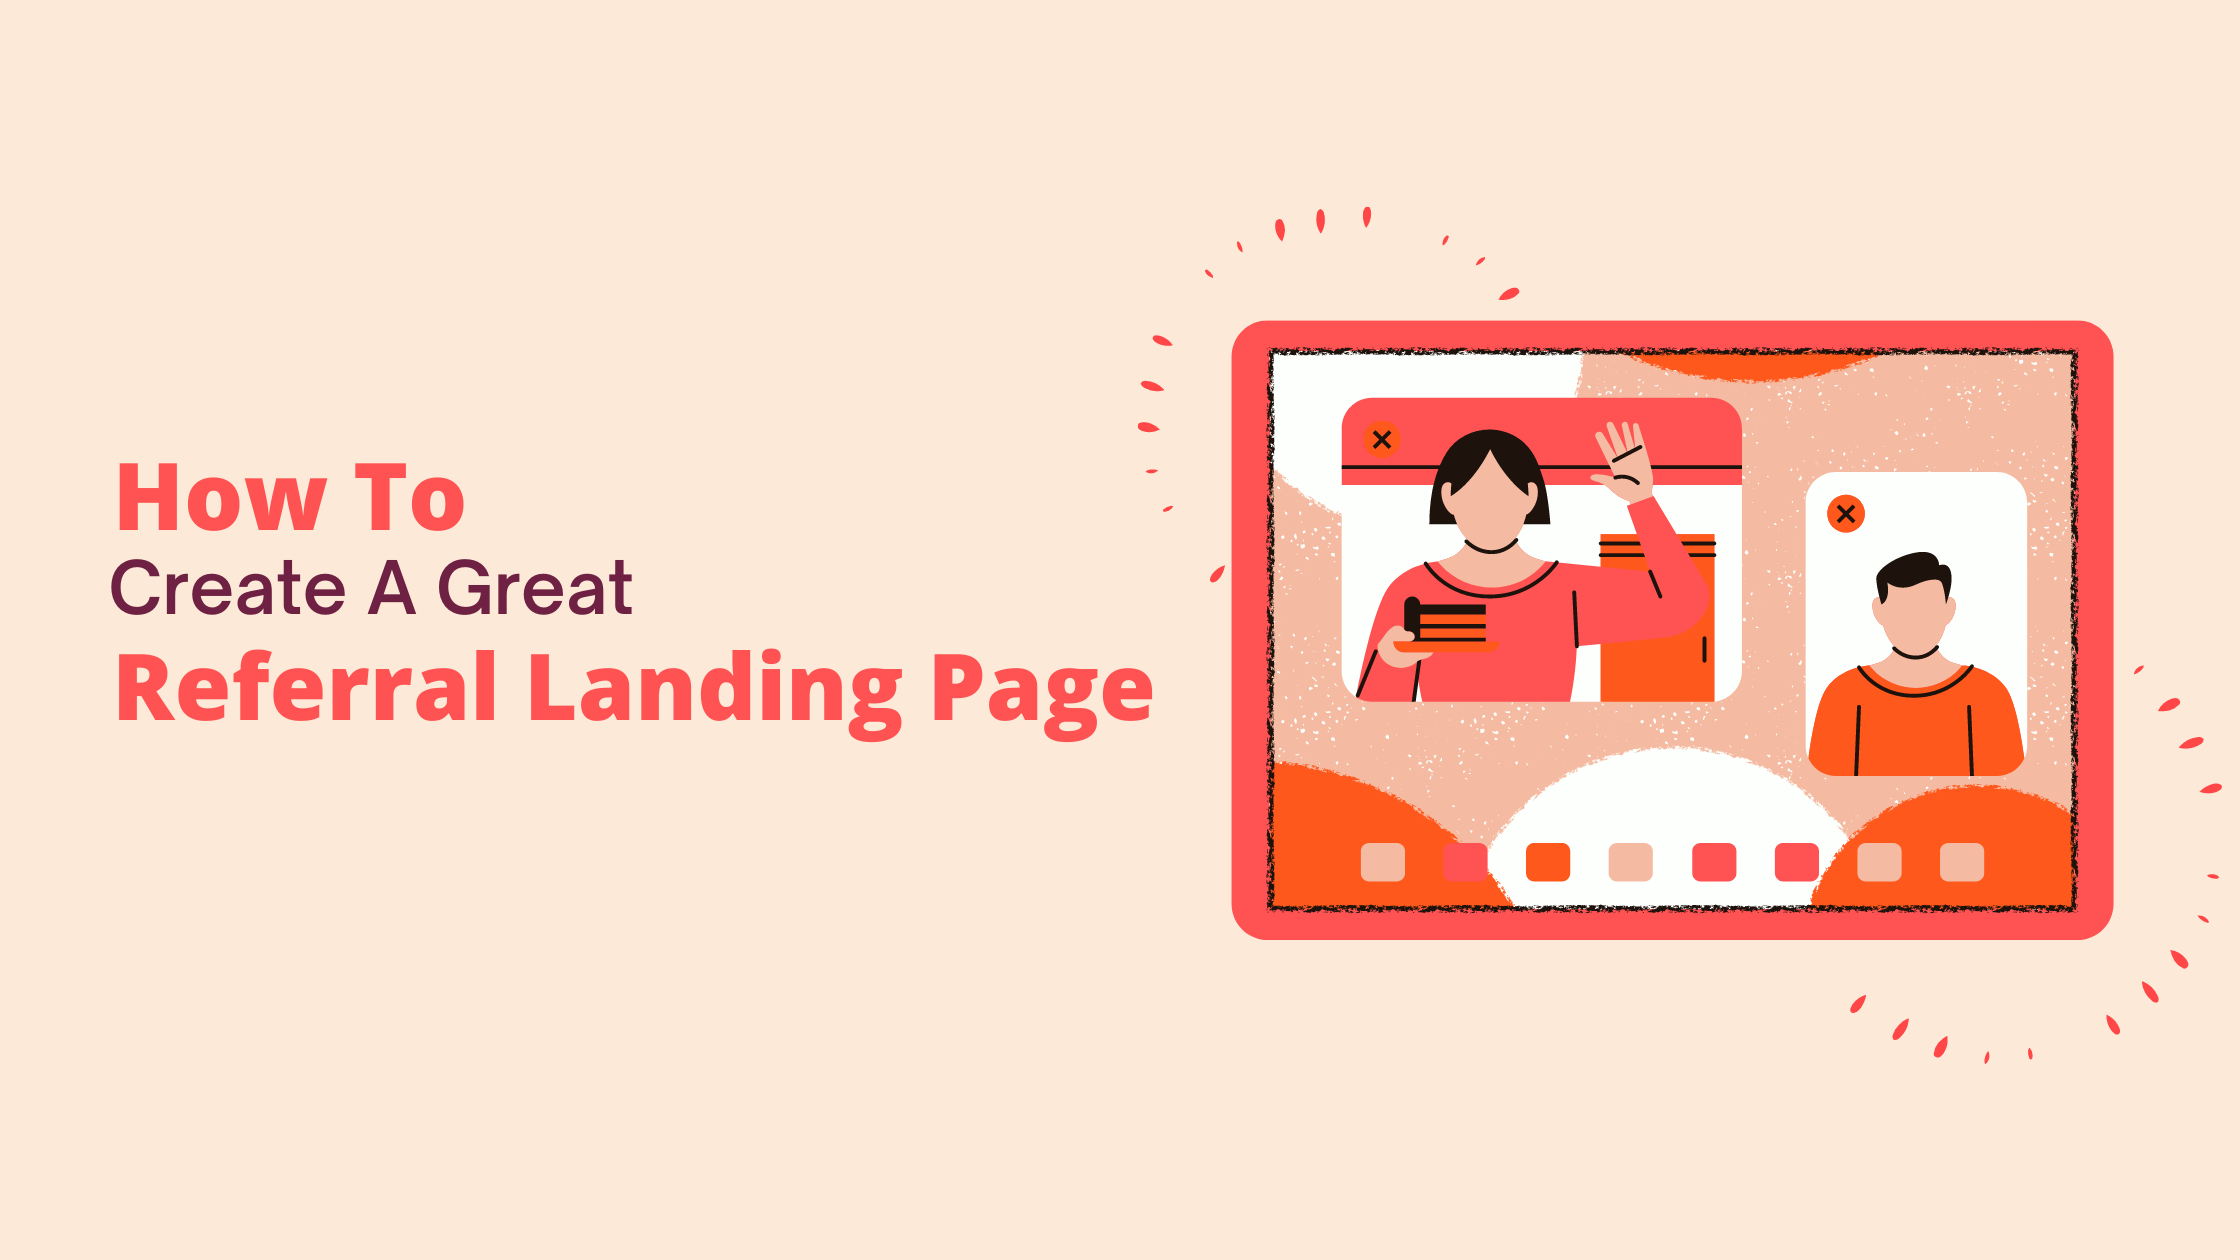 How to create a great referral landing page